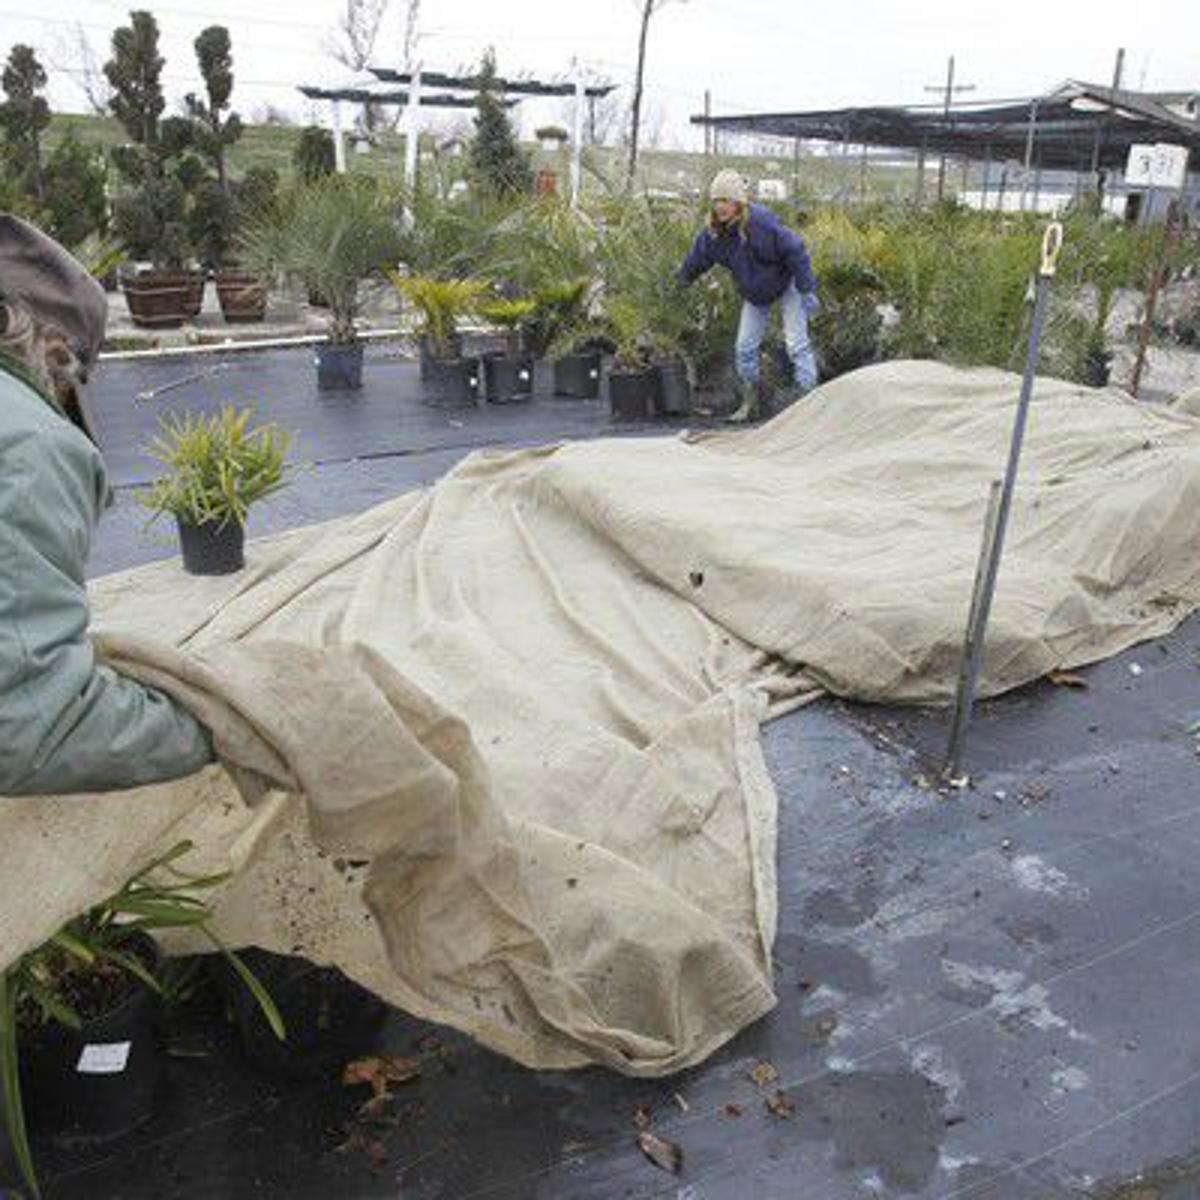 Should You Use Fabric Or Plastic Covers For Plants This Winter Tips For Surviving Freeze Home Garden Nola Com